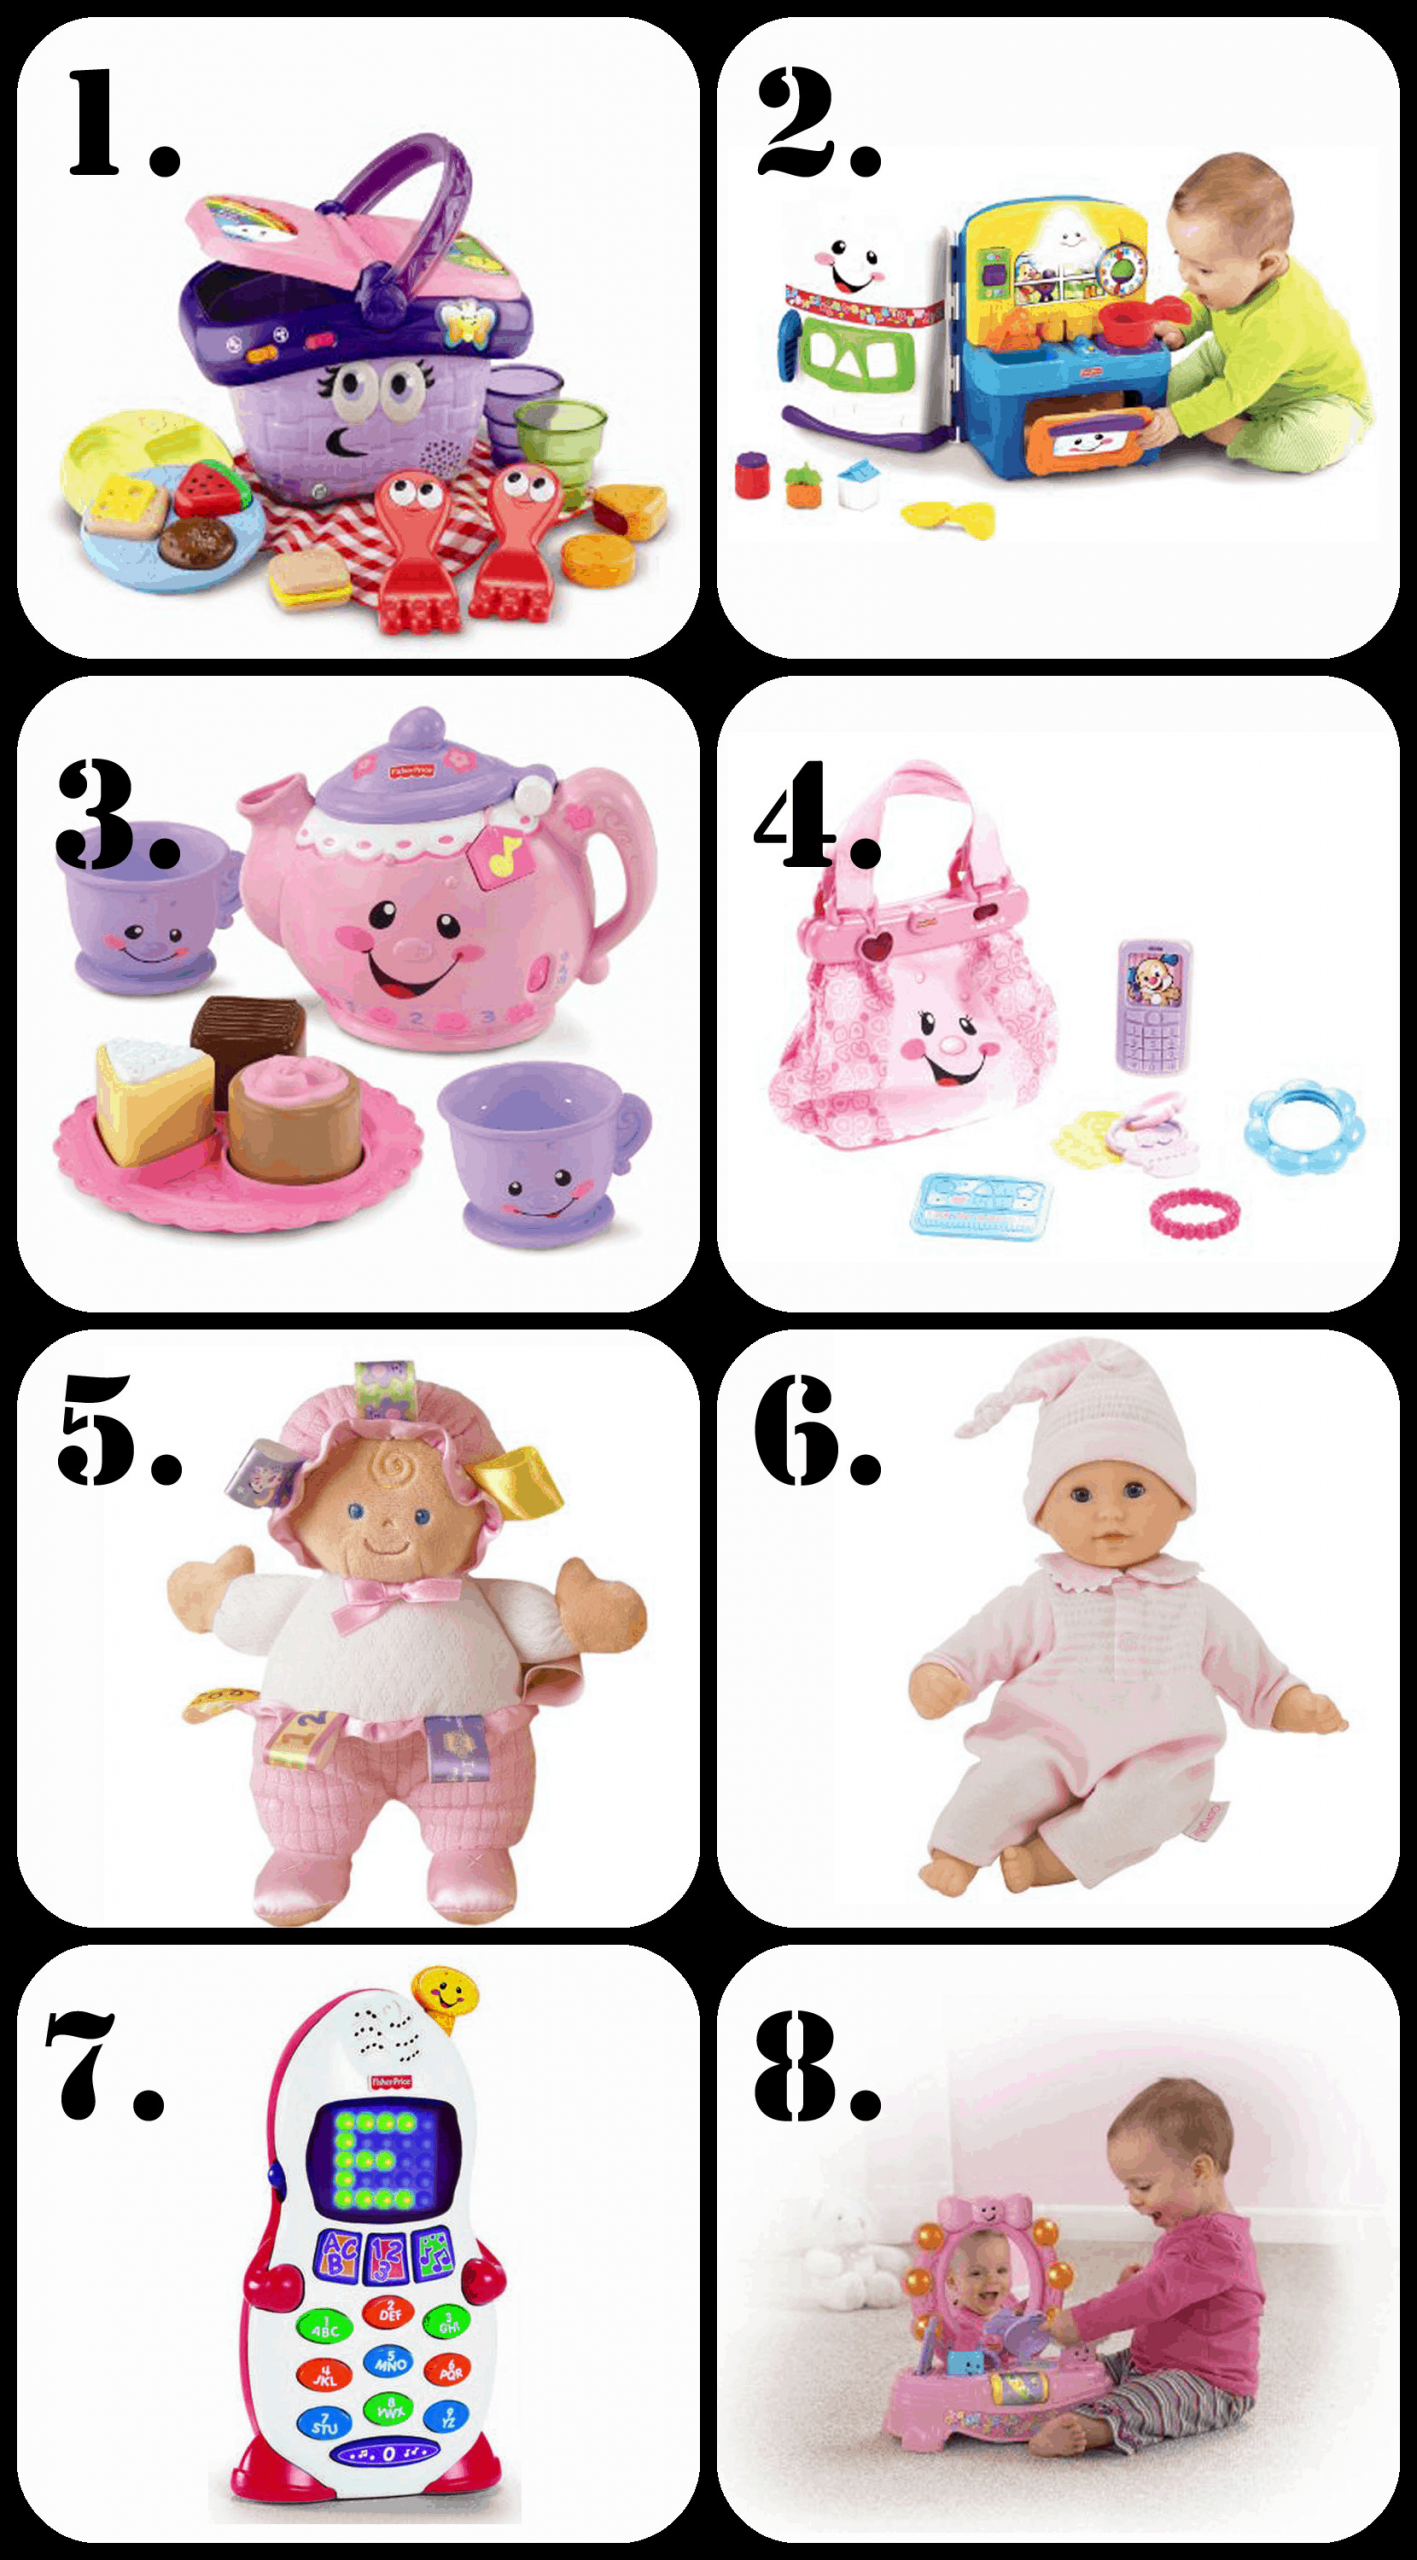 Best 1 Year Old Birthday Gifts
 The Ultimate List of Gift Ideas for a 1 Year Old Girl